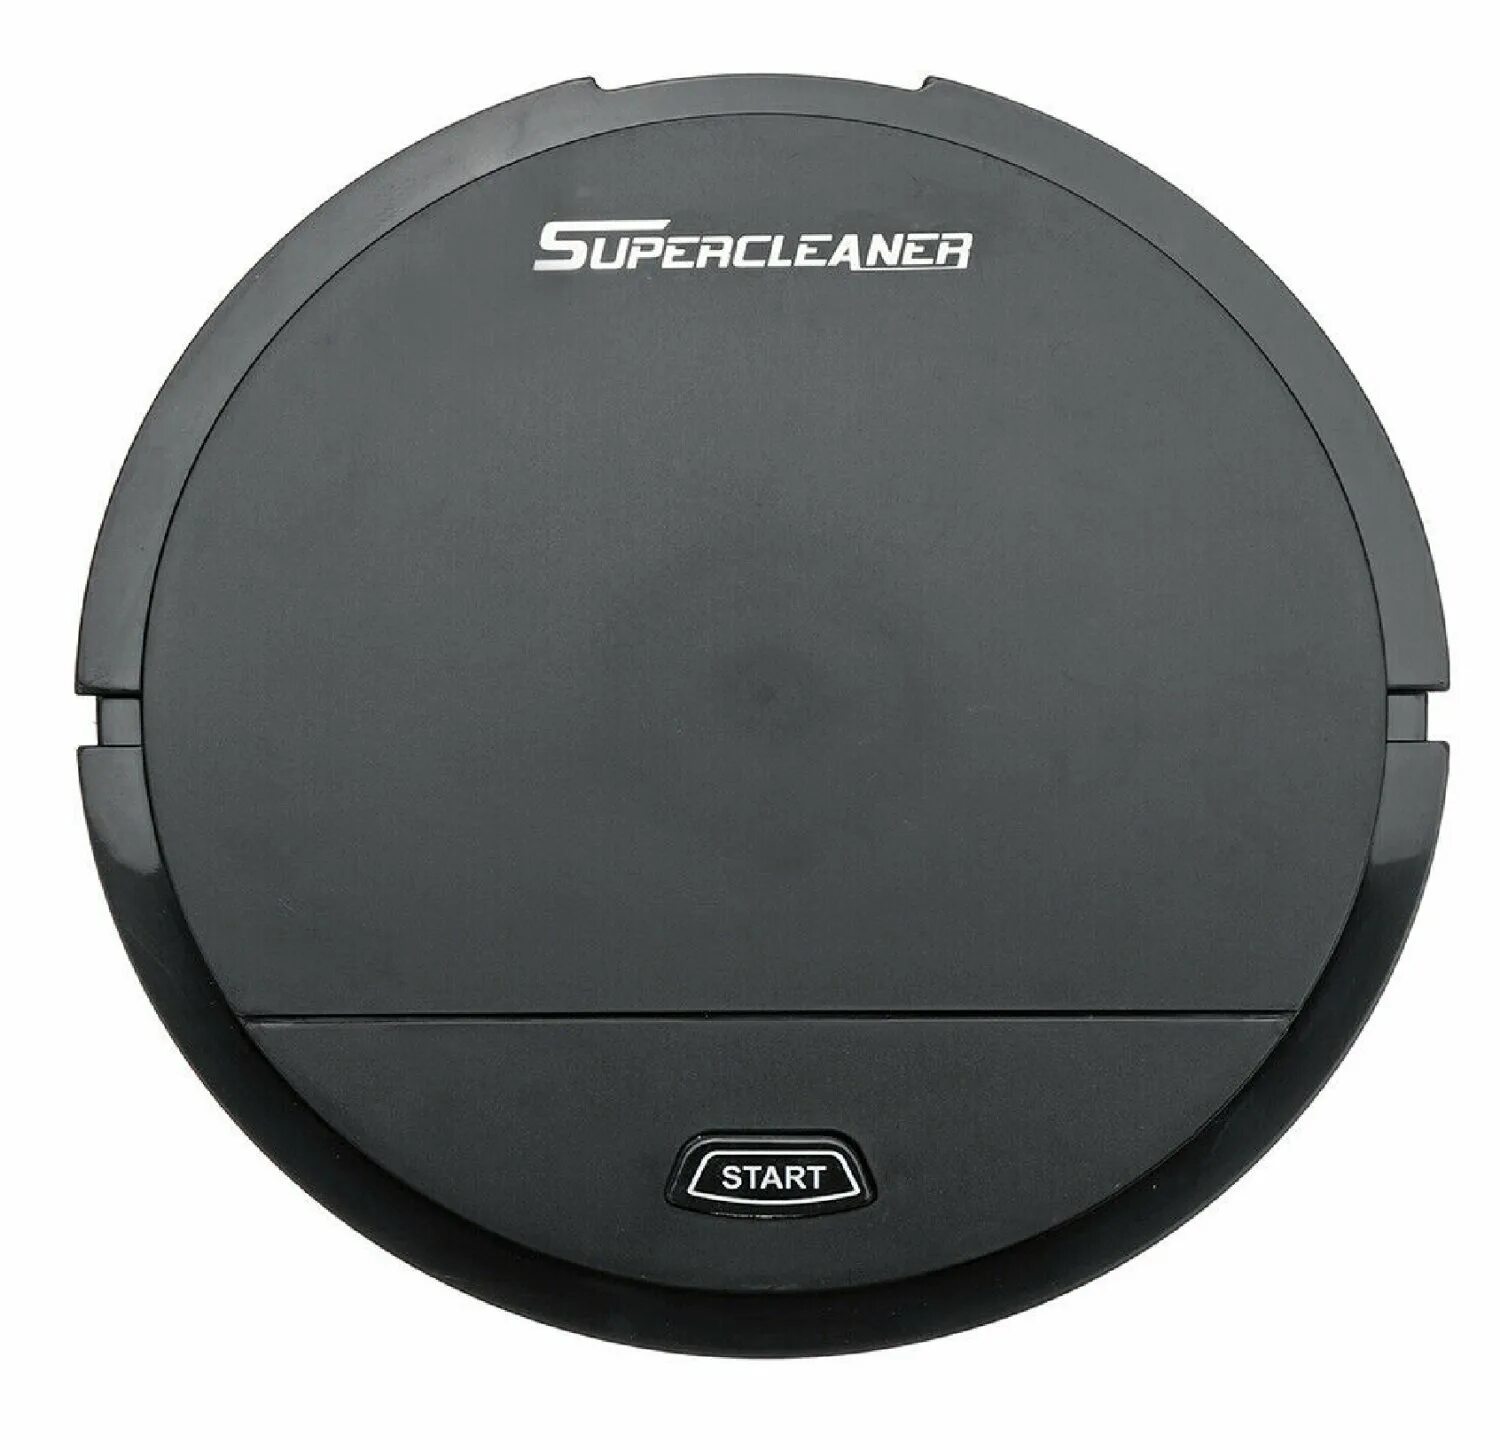 Sweeper robot. Робот пылесос super Cleaner Sweeper. Automatic Smart sweeping Robot Vacuum Cleaner strong Suction Dry wet clean. Робот пылесос sweeping Robot. Робот пылесос sweeping Robot 020.